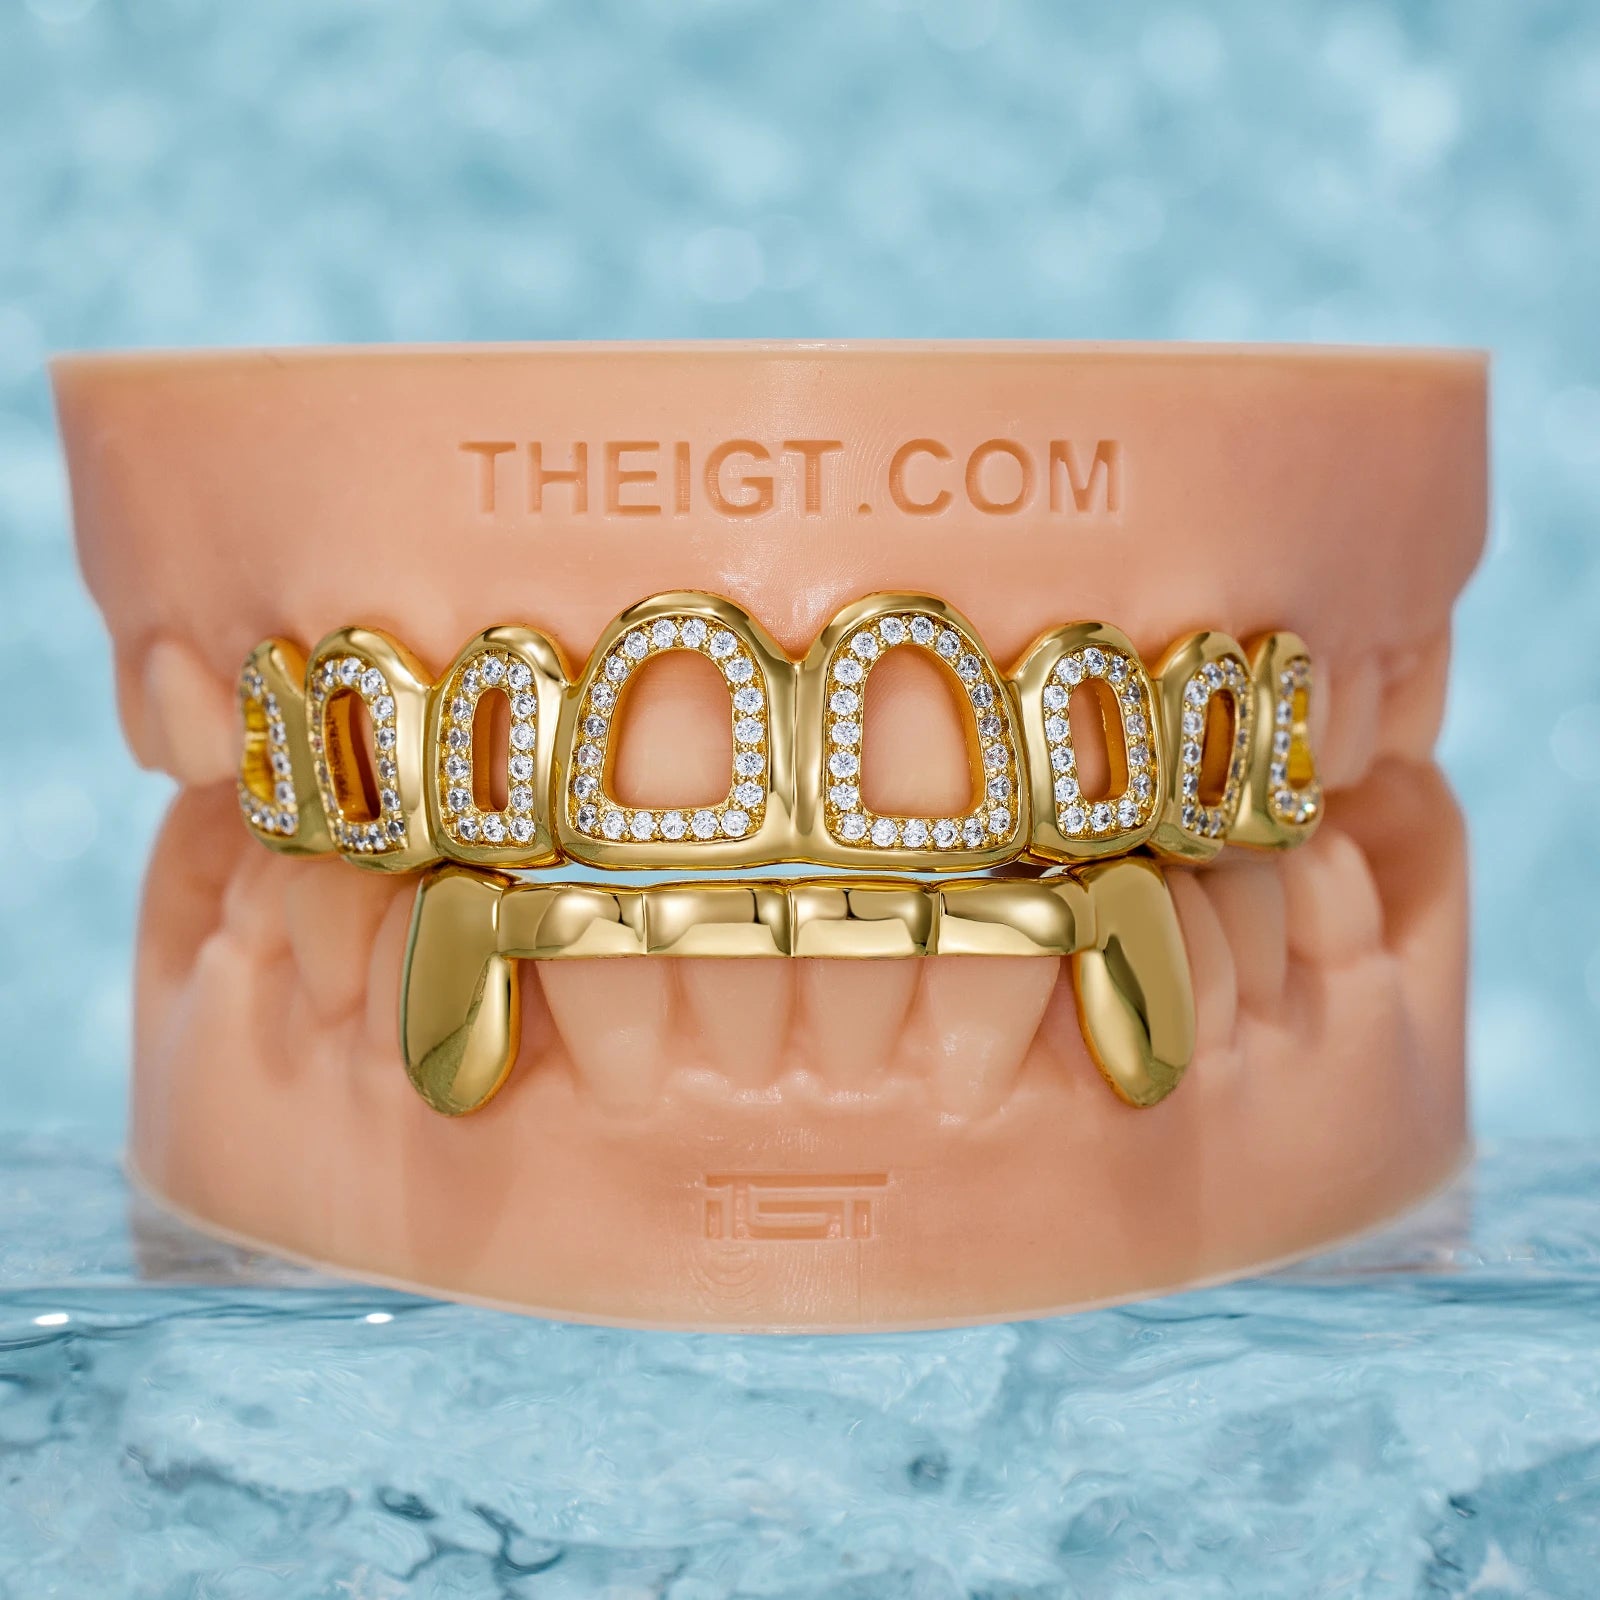 CUSTOM ICED OUT OPEN-FACE GRILLZ